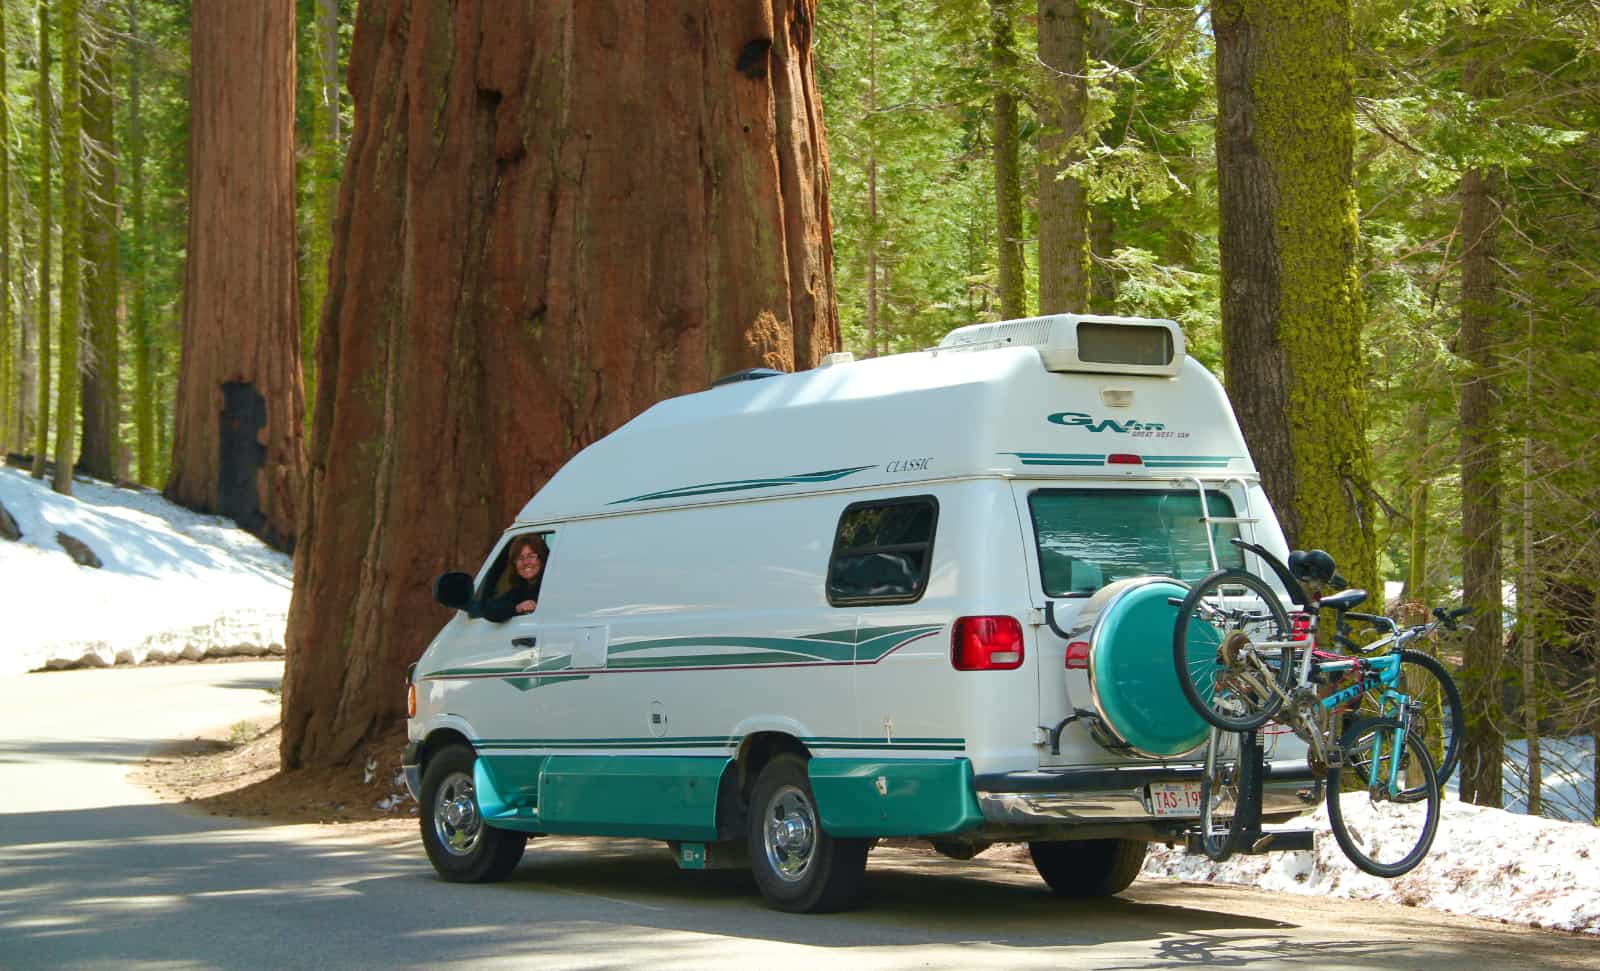 White and turquoise camper van parked on road